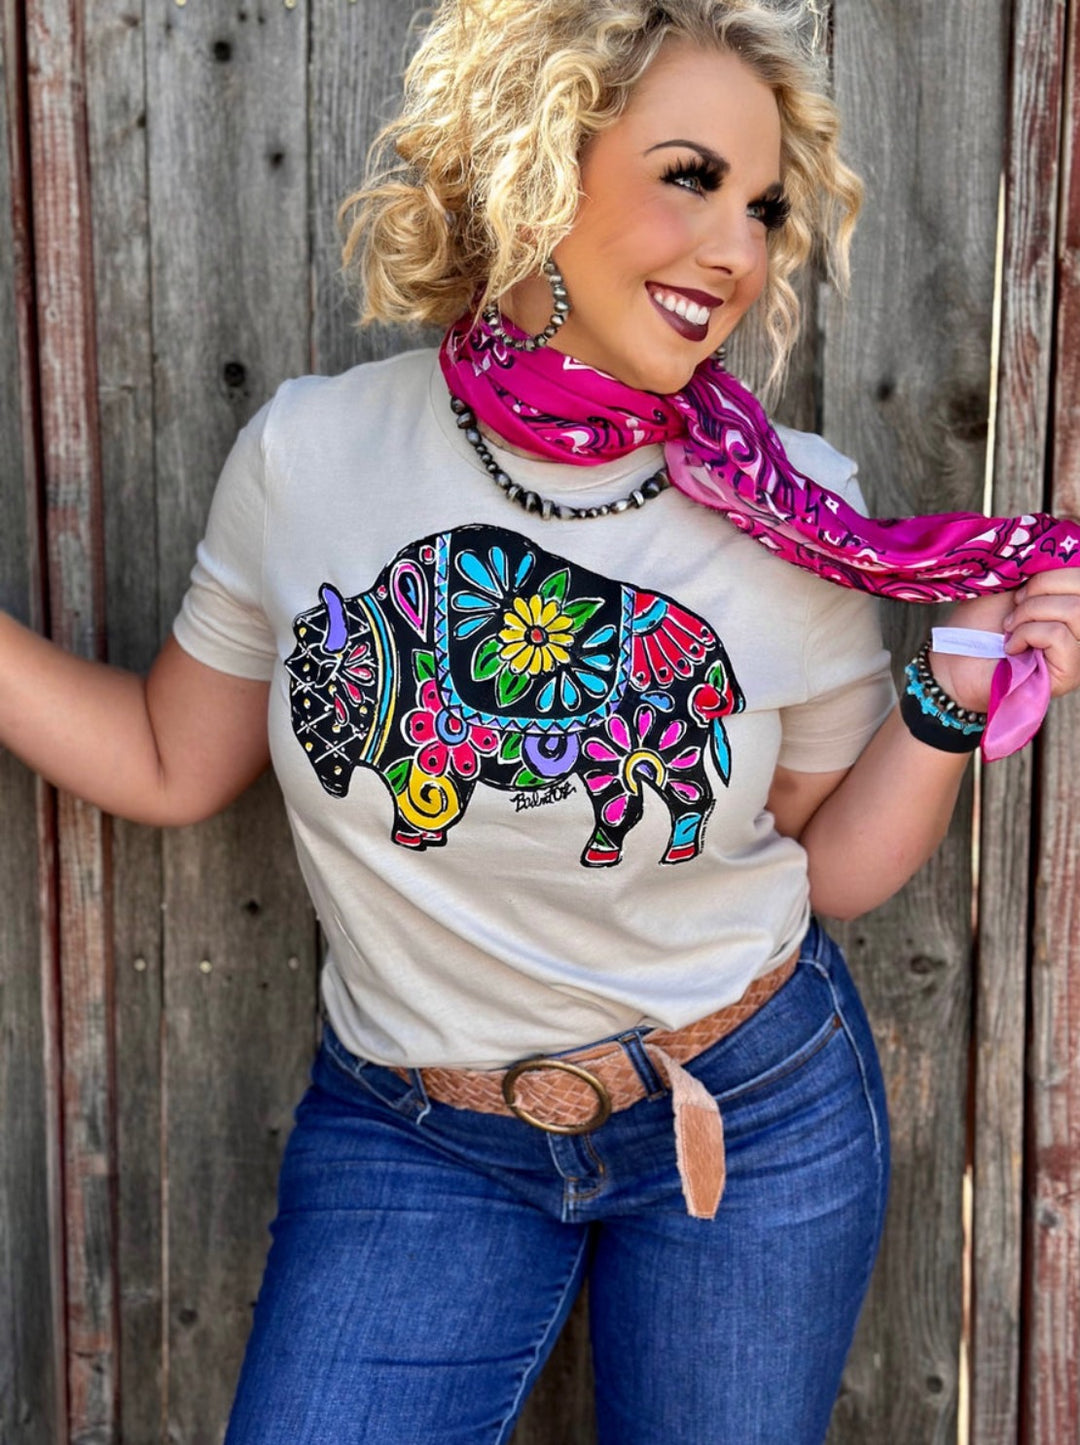 Barb's Floral Buffalo Graphic Tee by Texas True Threads